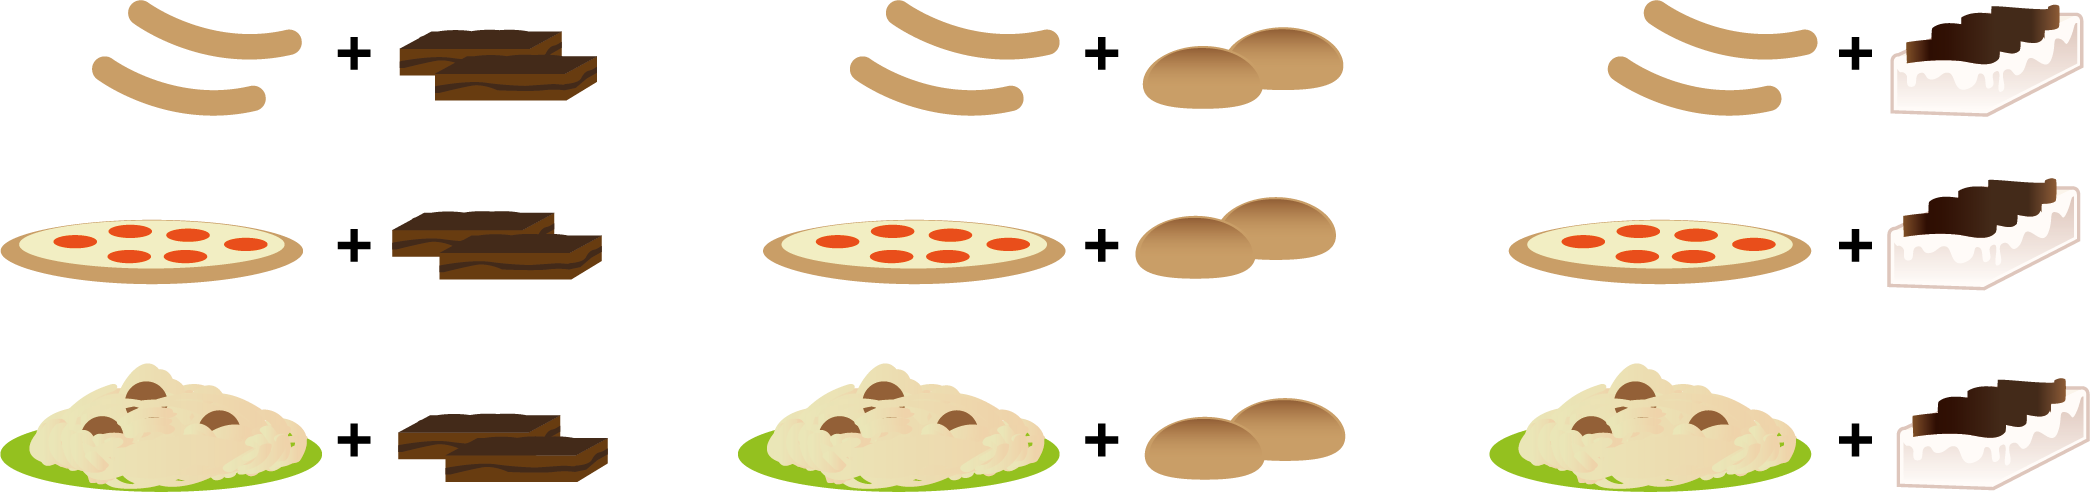 Combinations of sausages, pizzas, and chocolate